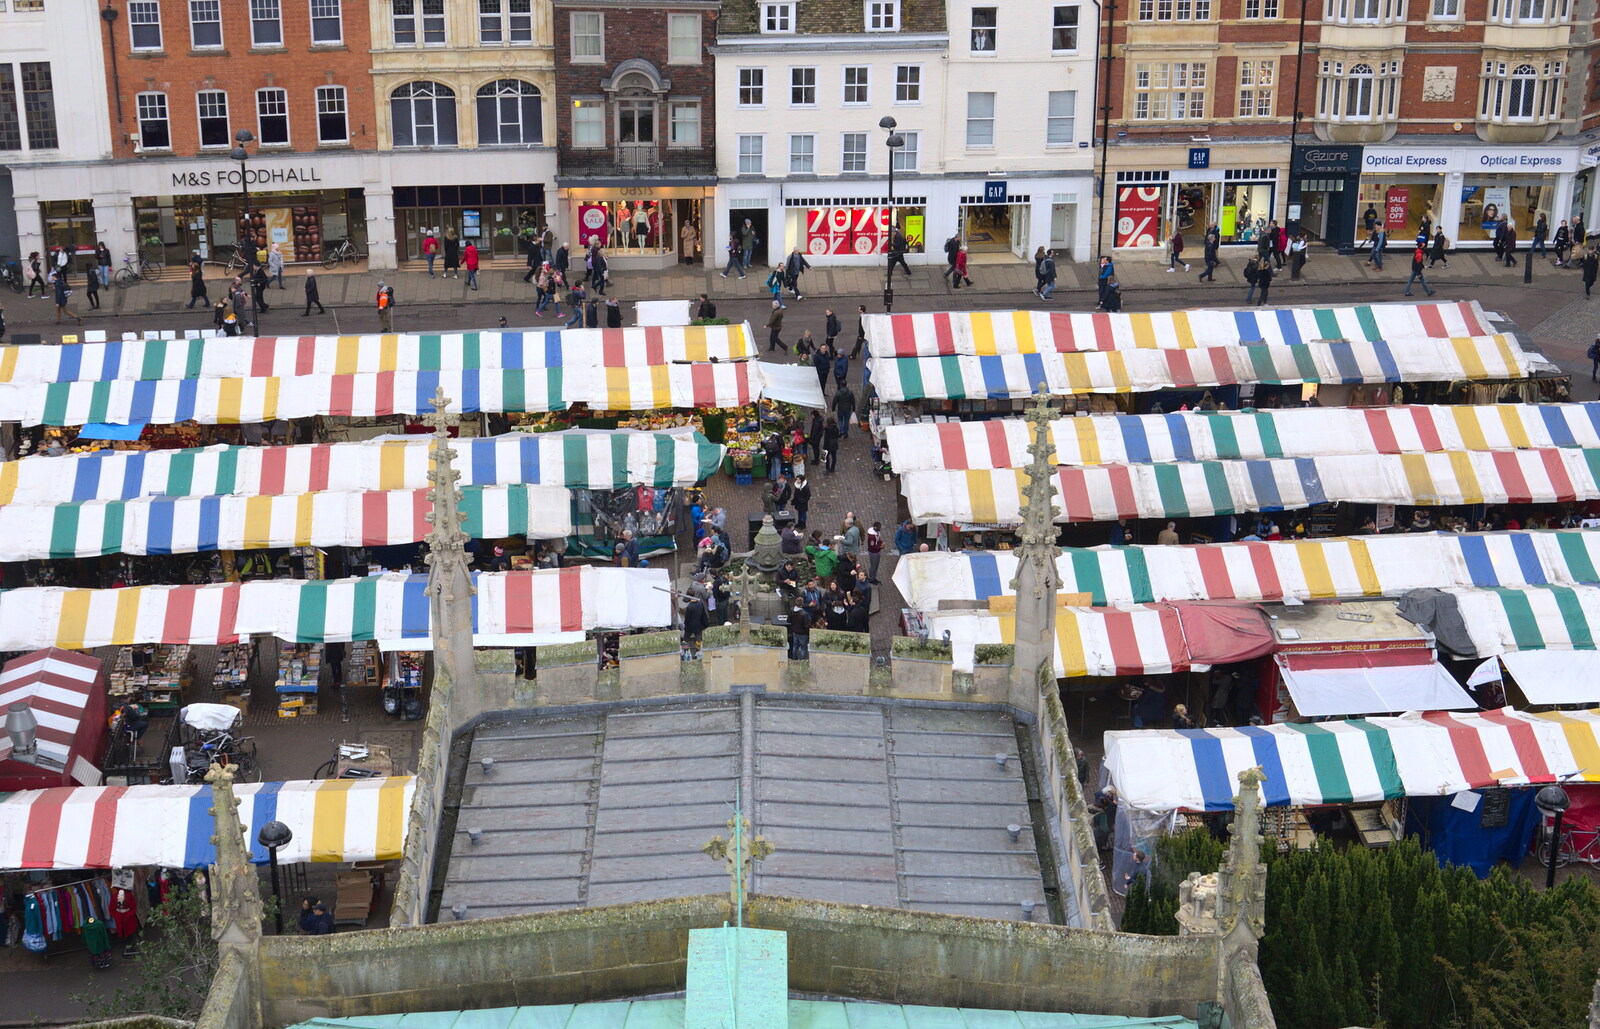 The stripey market stall roofs of Cambridge from The SwiftKey Reunion Brunch, Regent Street, Cambridge - 12th January 2019